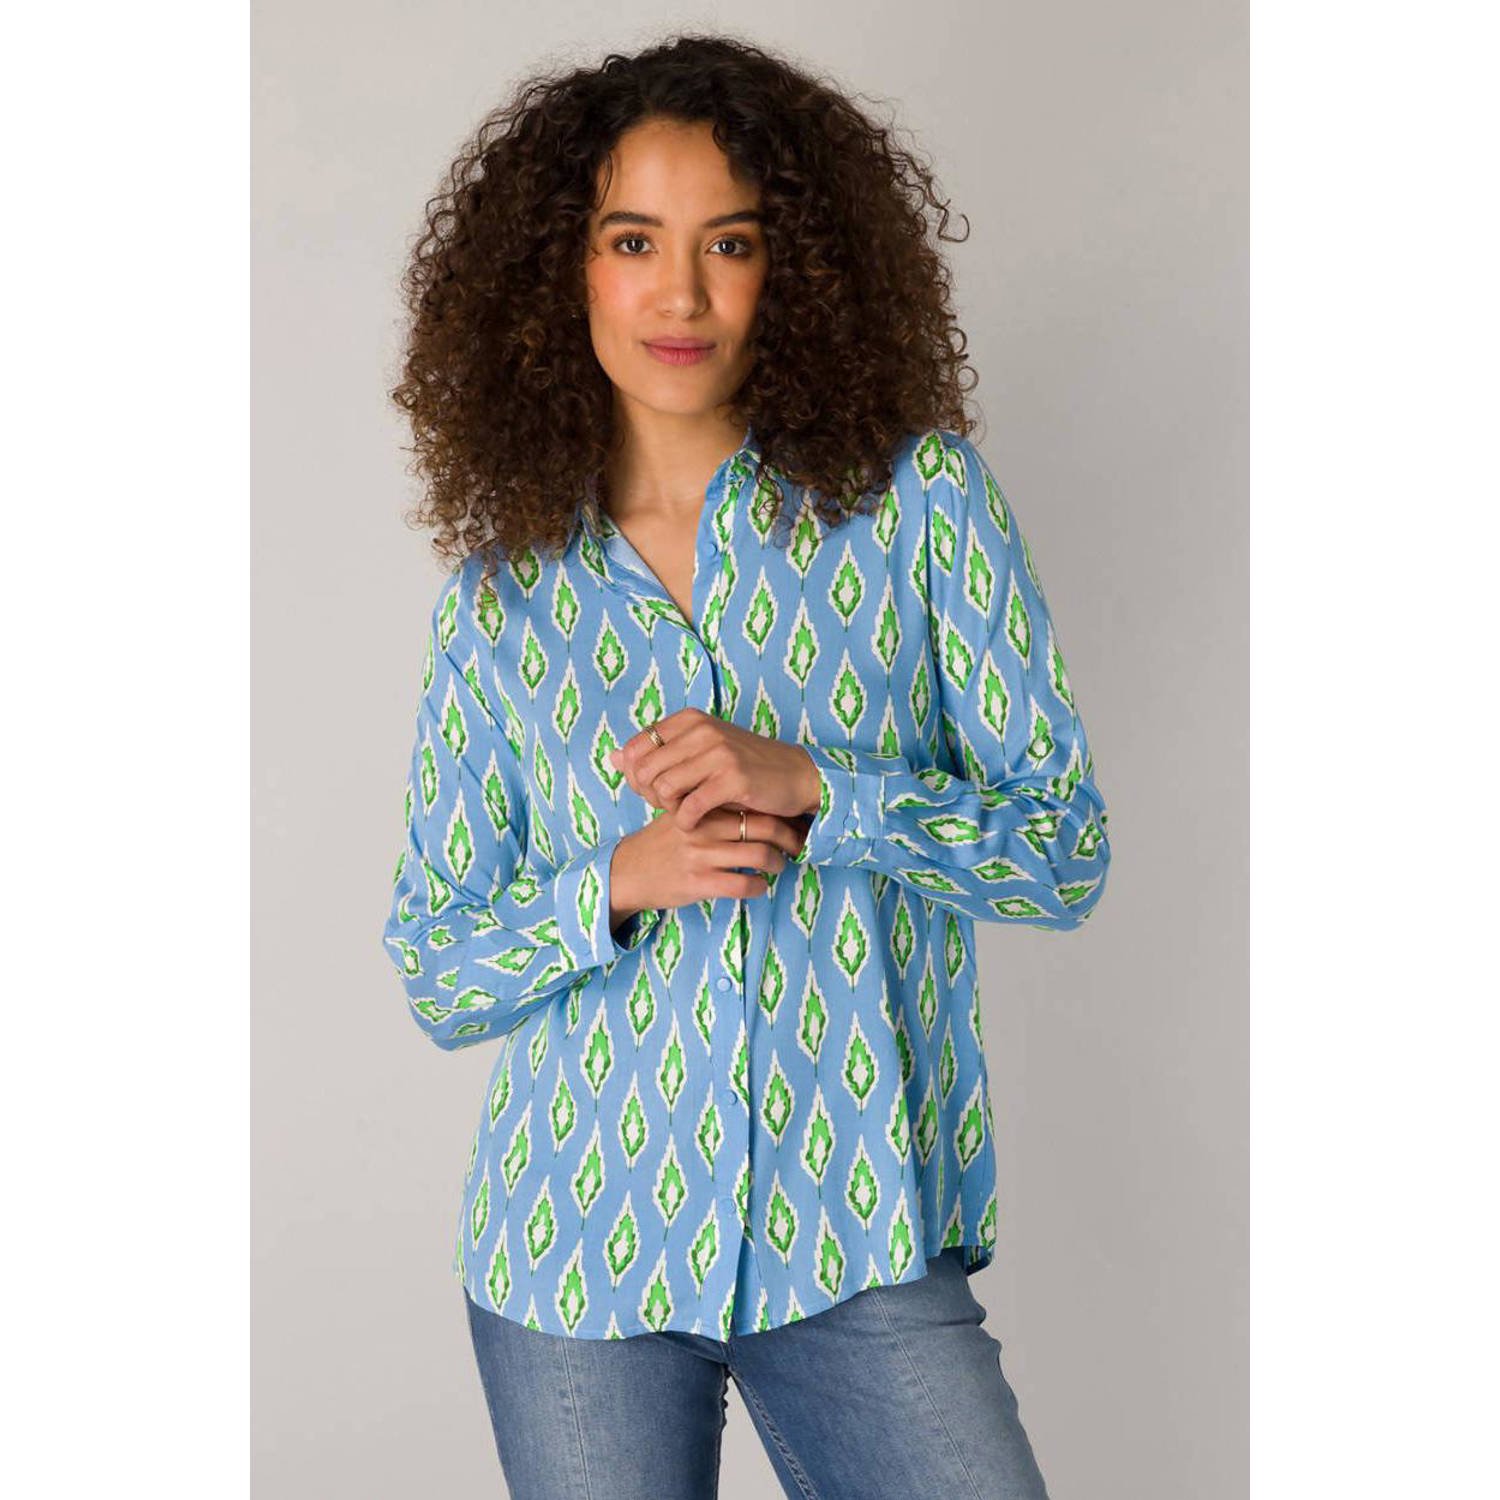 ES&SY blouse met all over print lichtblauw groen